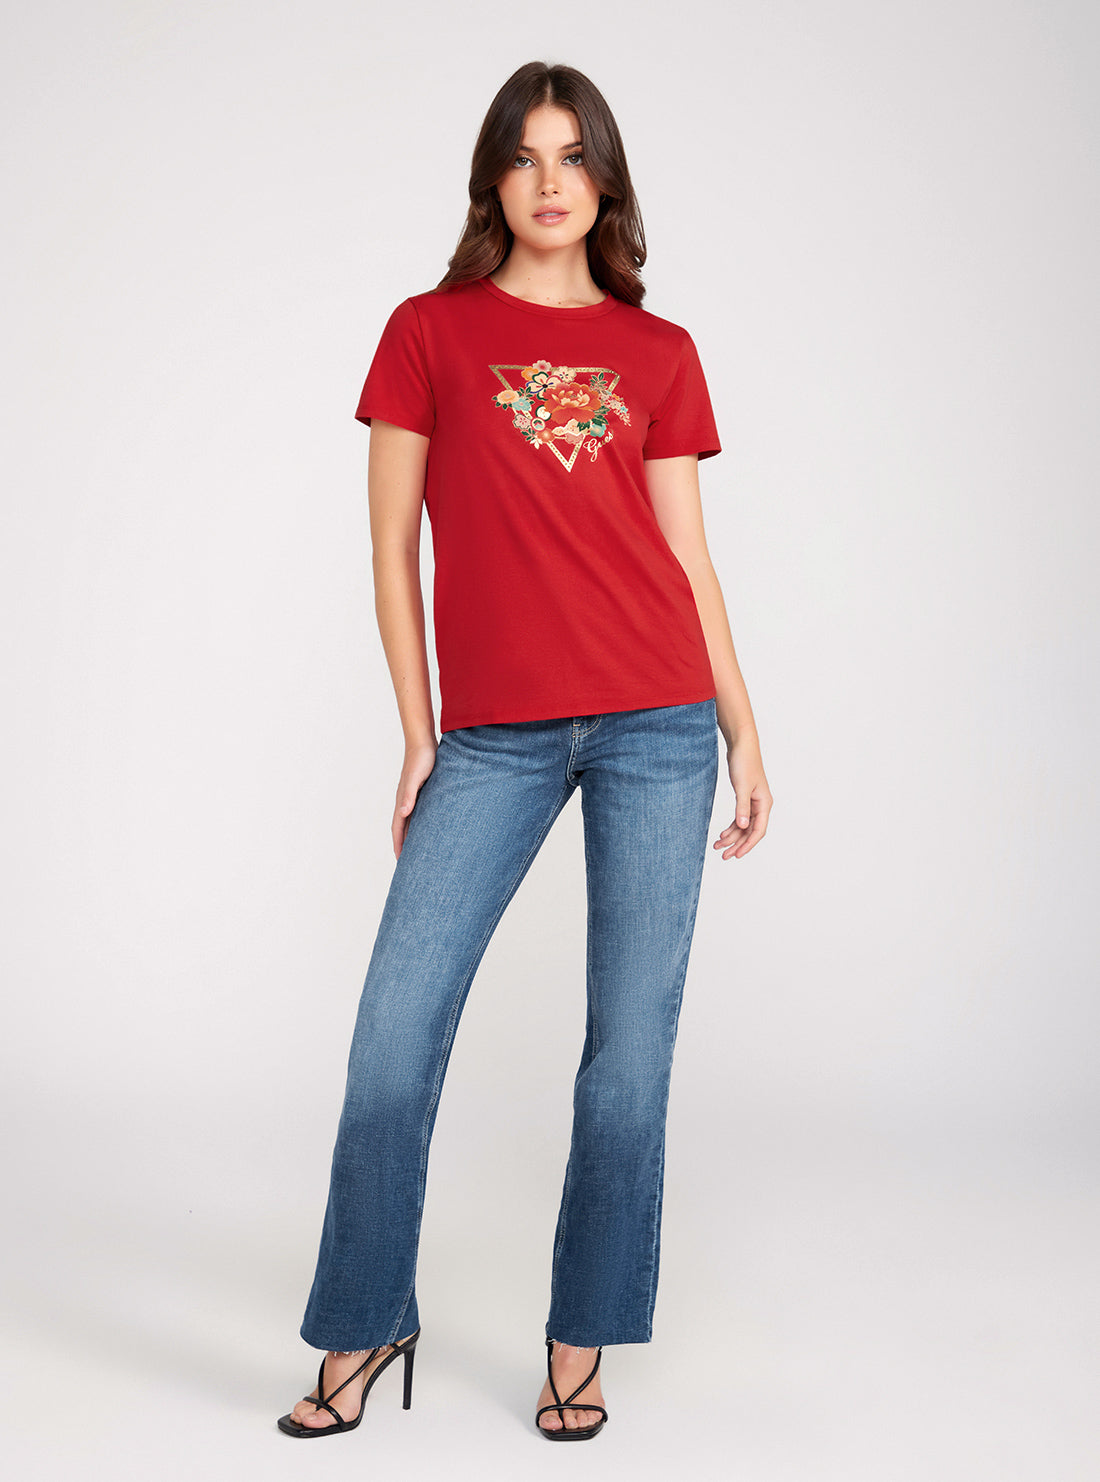 GUESS Red Short Sleeve Flower Logo Easy Tee full view